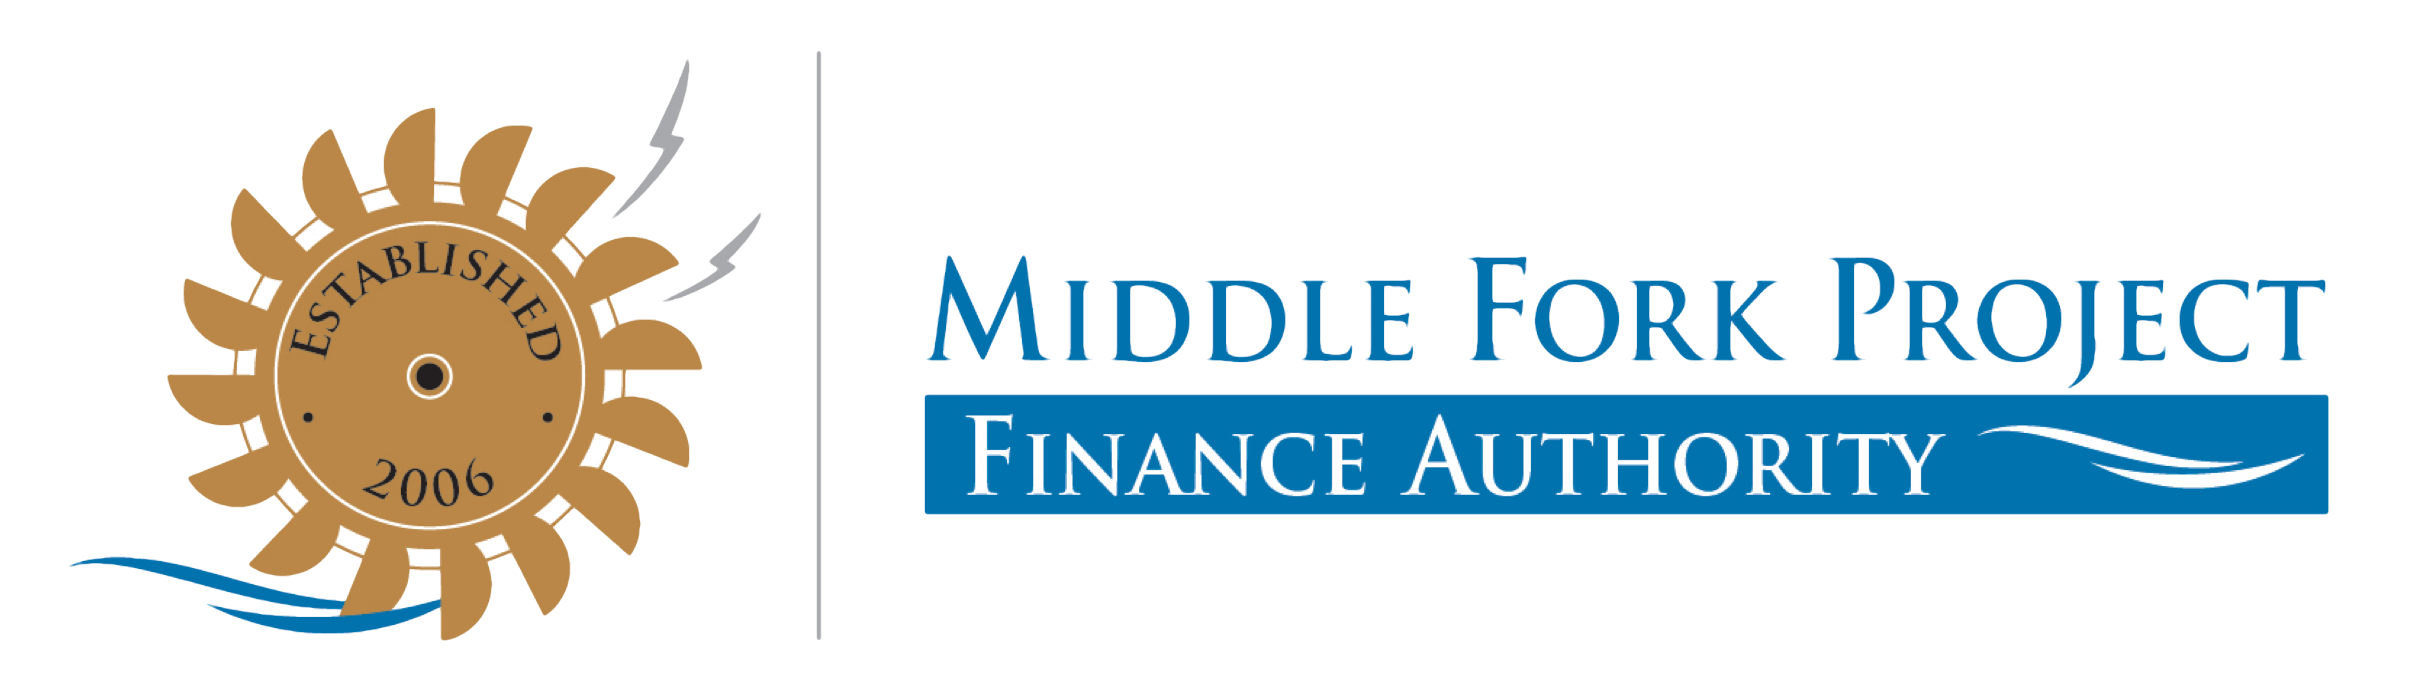 Middle Fork Project Finance Authority Logo